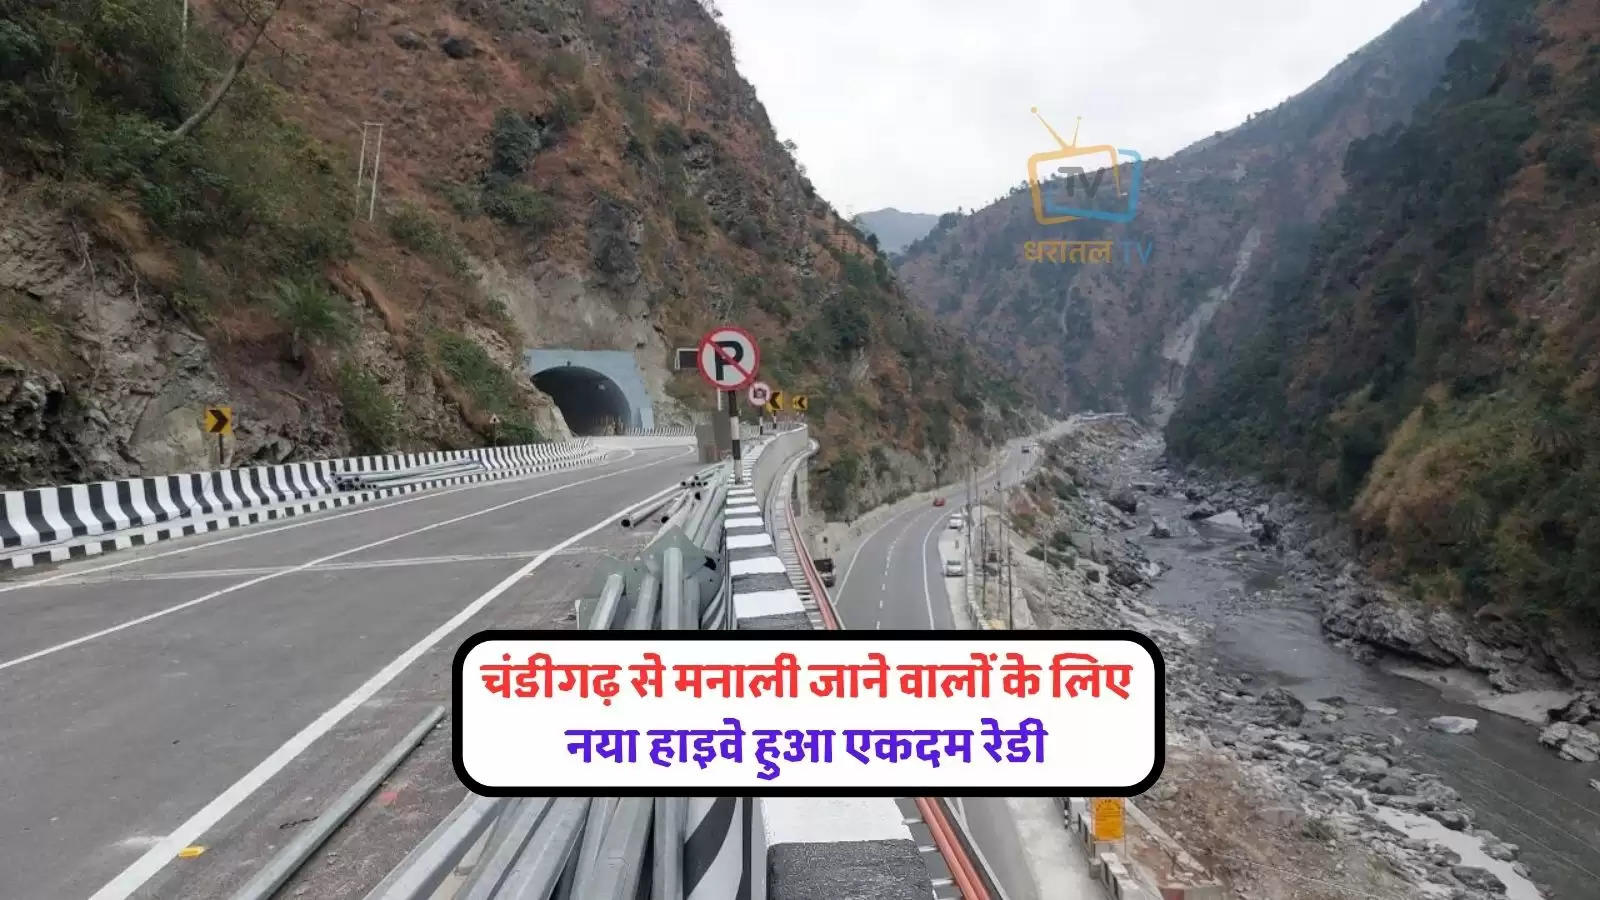 expressways-chandigarh-manali-highways-kiratpur-nerchowk-section-start-soon-check-route-distance-and-travel-time-and-completion-date